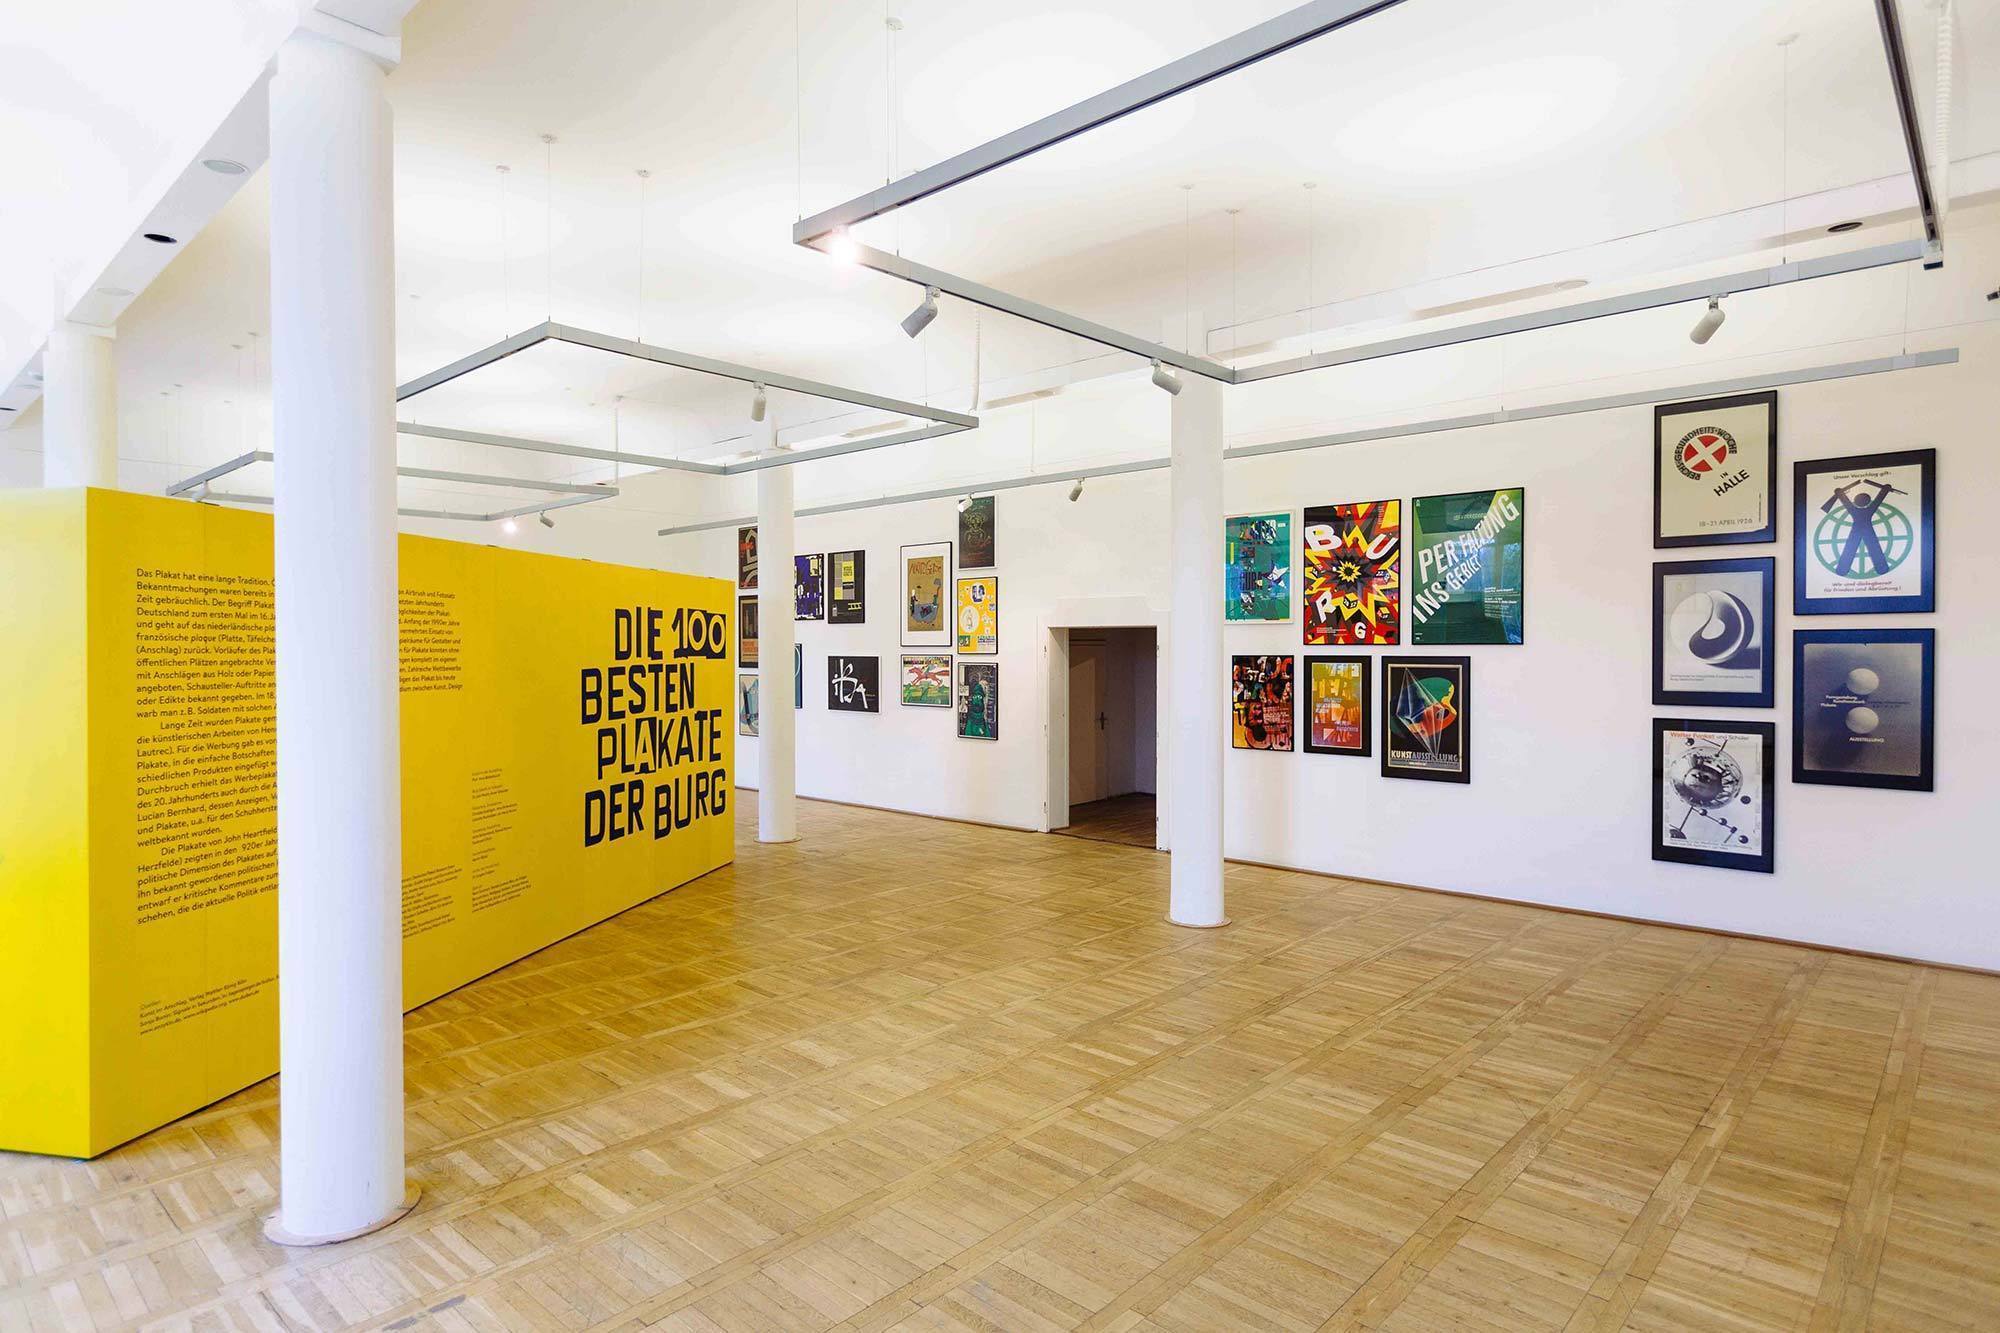 Ultimately over 100 posters were split up upon two large rooms at the Volkspark gallery space in Halle. In each of the rooms six meter wide walls divide the space create another axis and to work as a meta source for information.